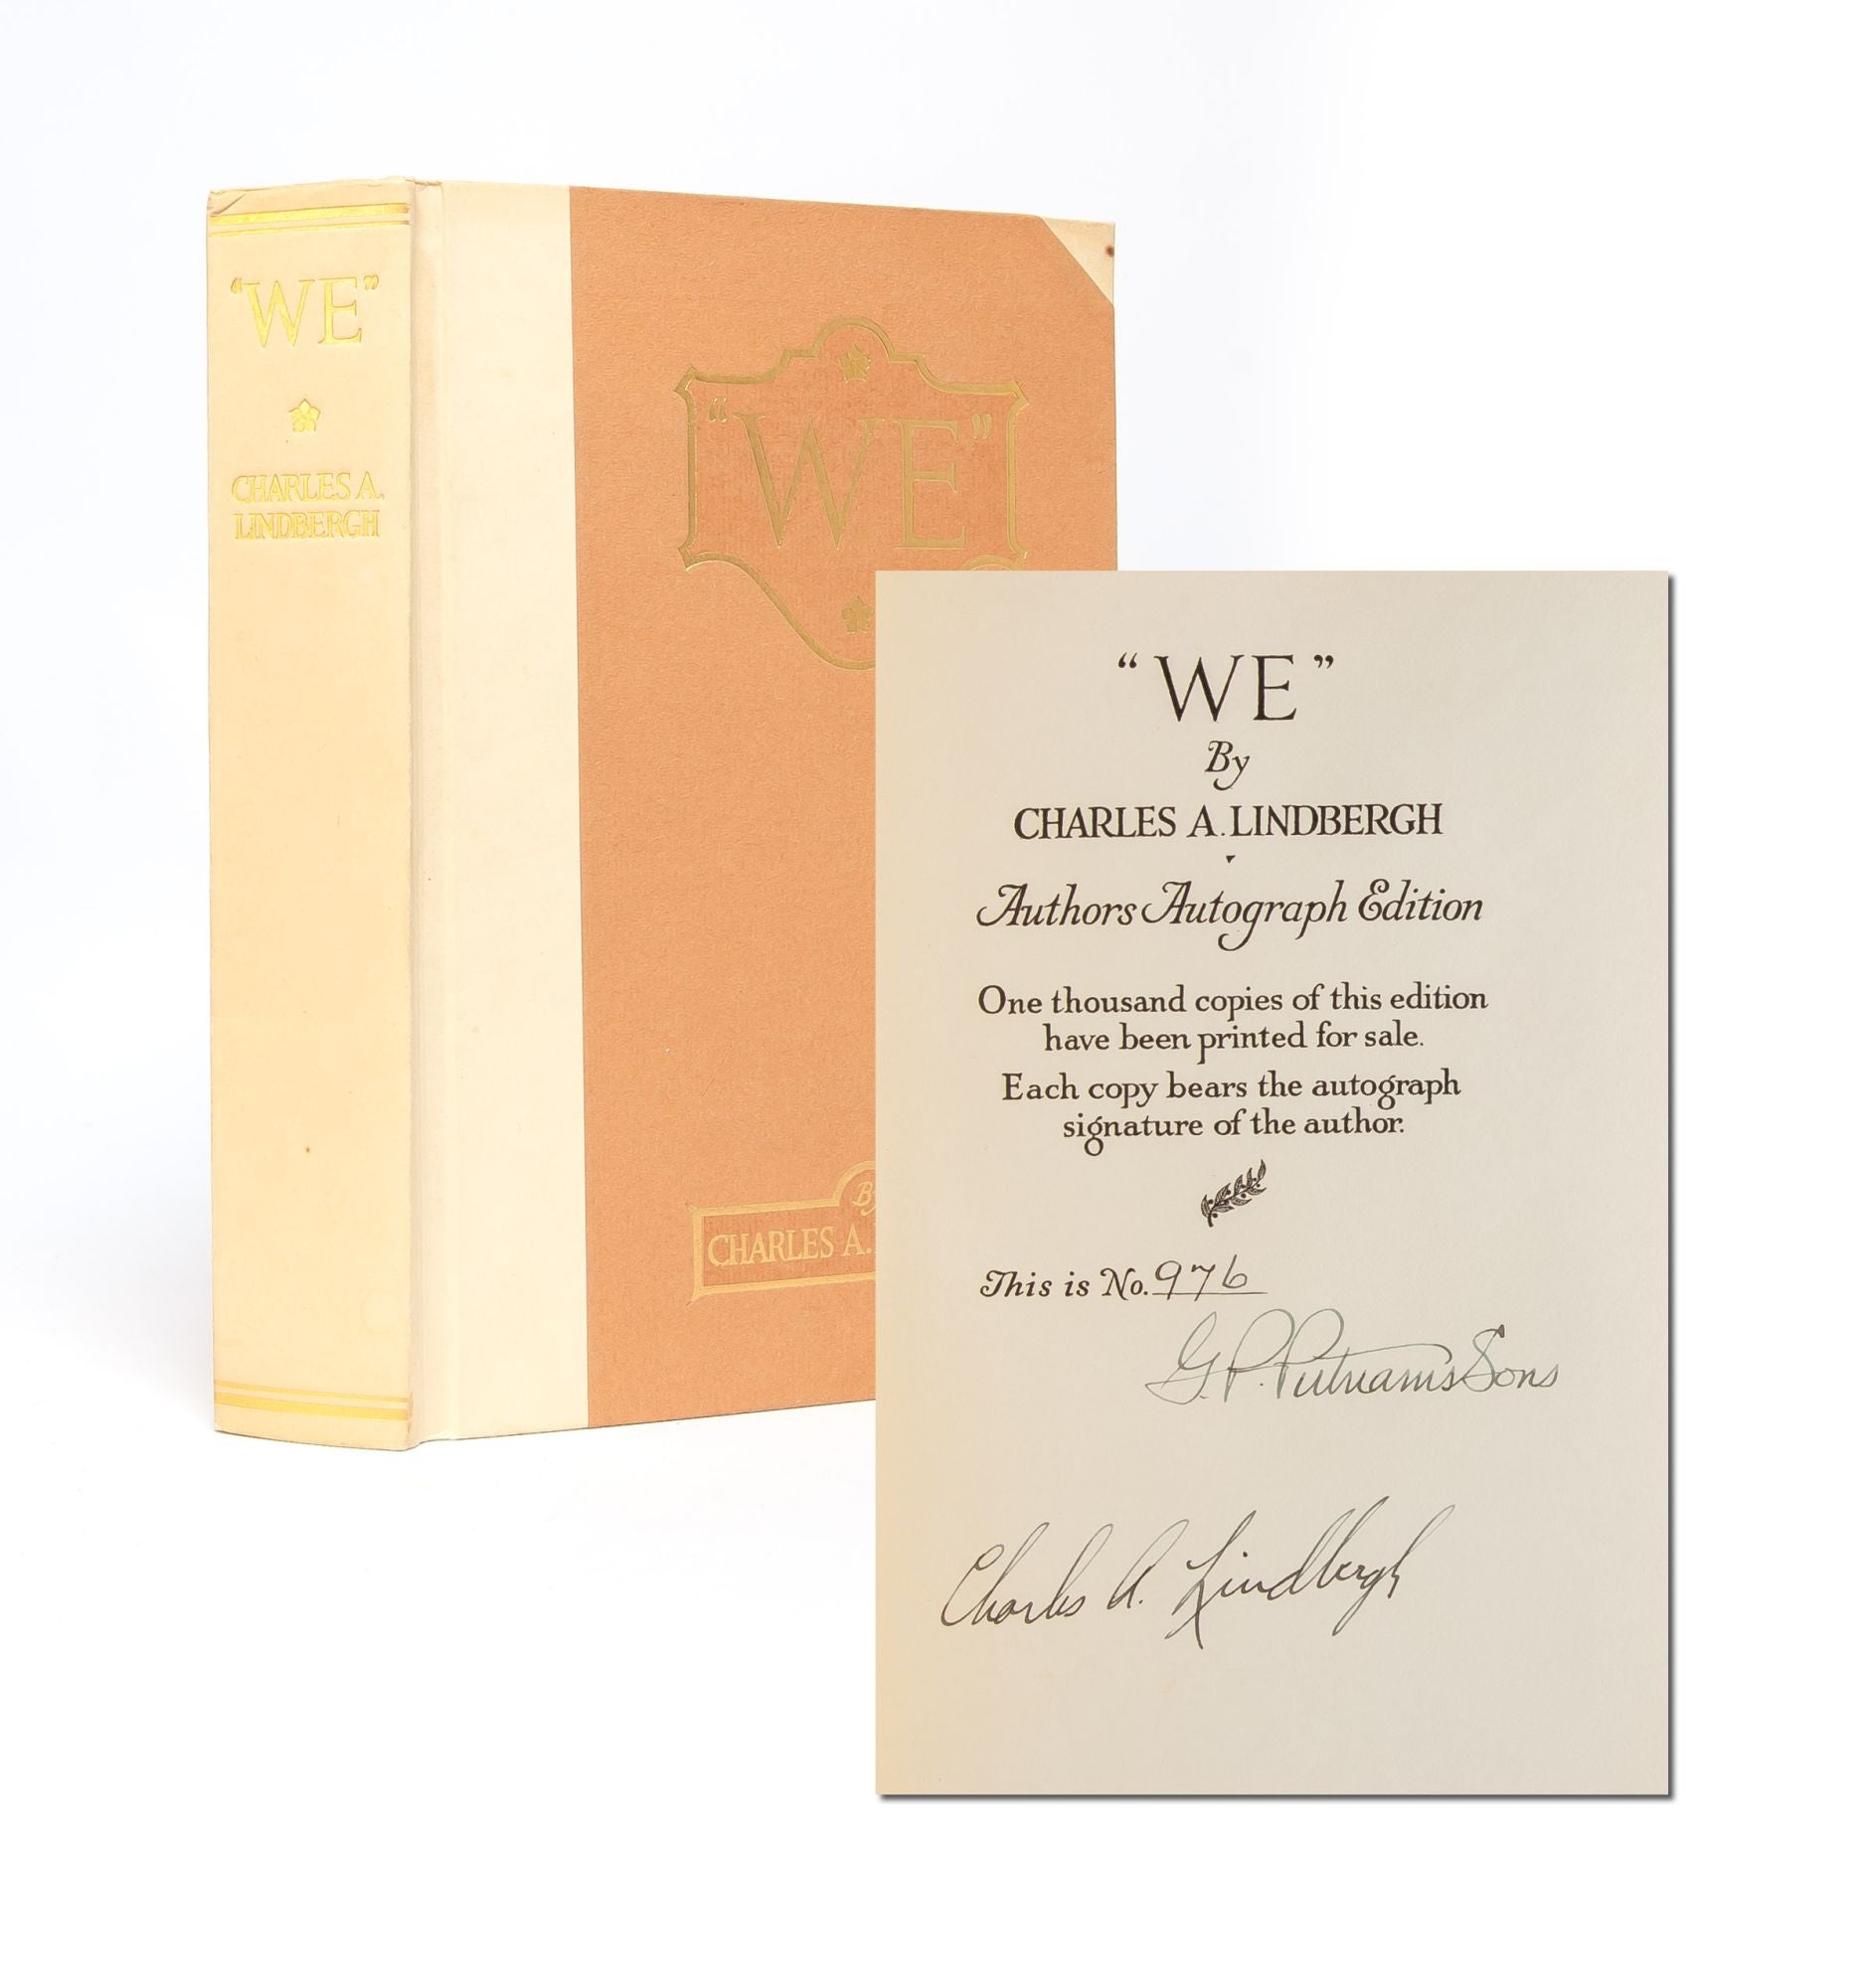 (Item #5261) "We" (Signed Limited Edition). Charles A. Lindbergh.